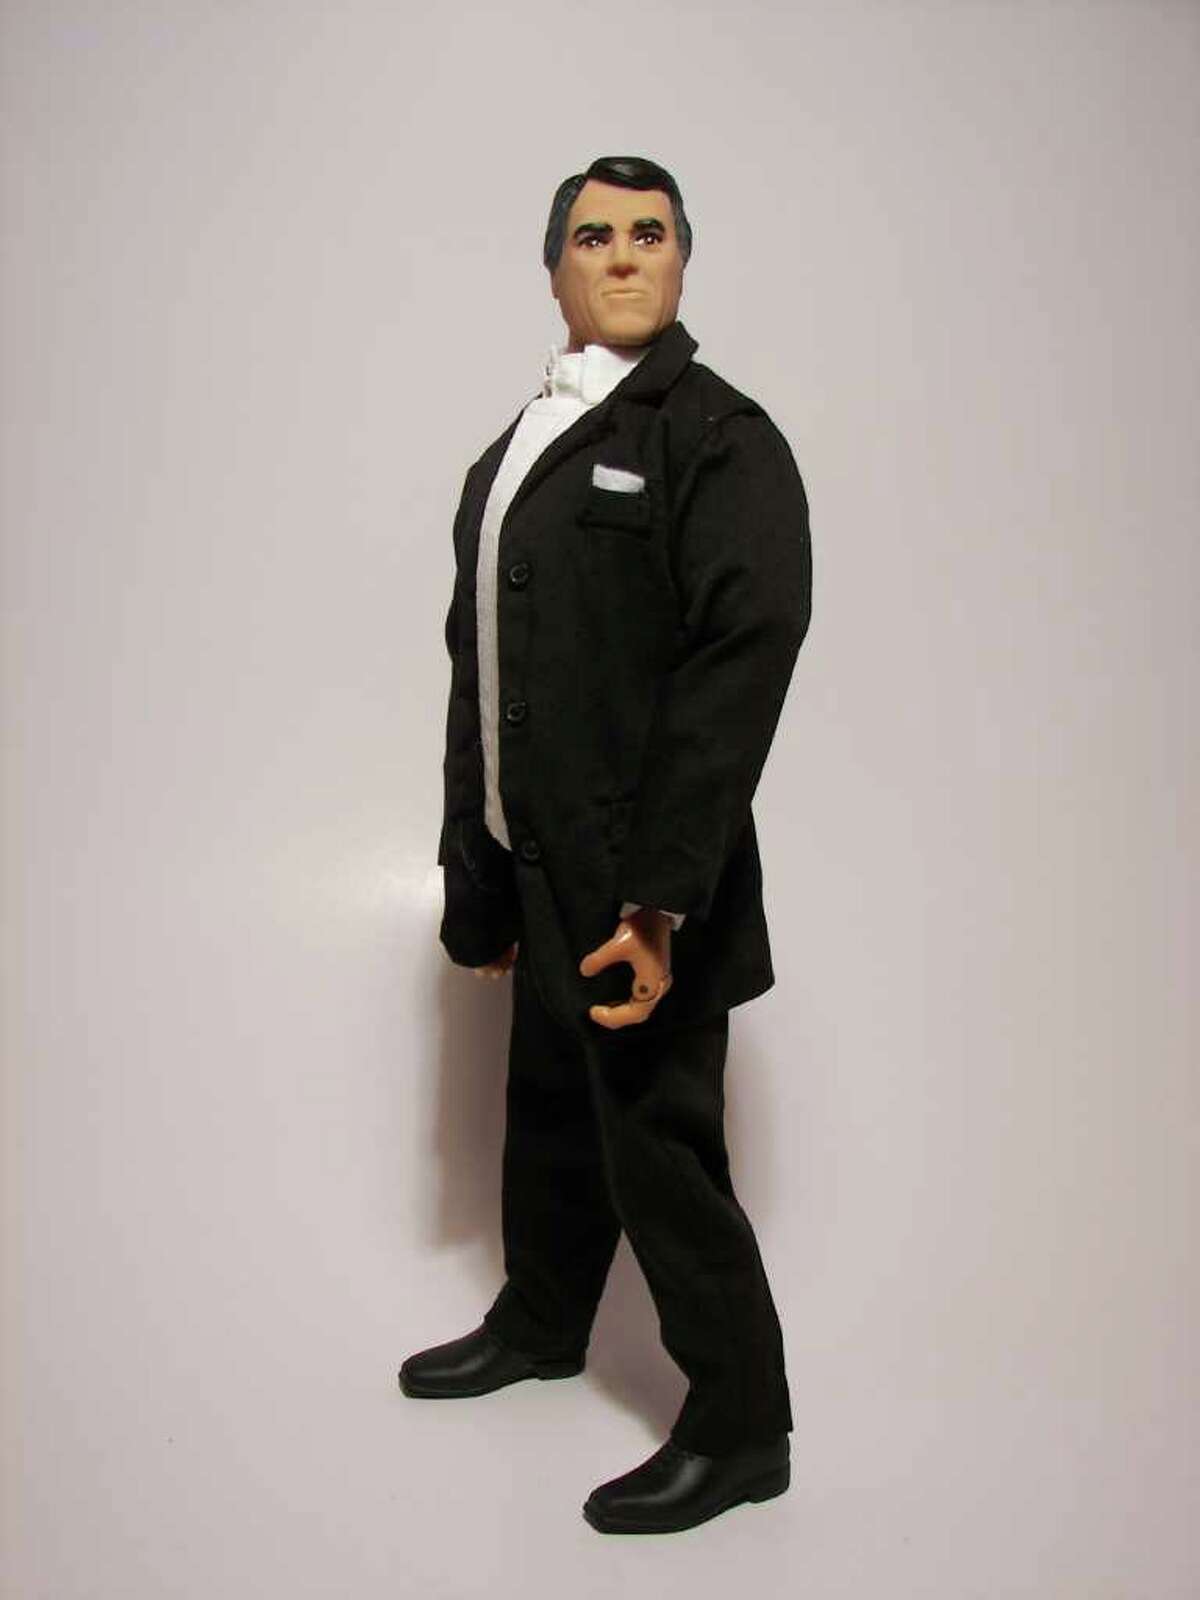 The Rick Perry action figure sports a suit.